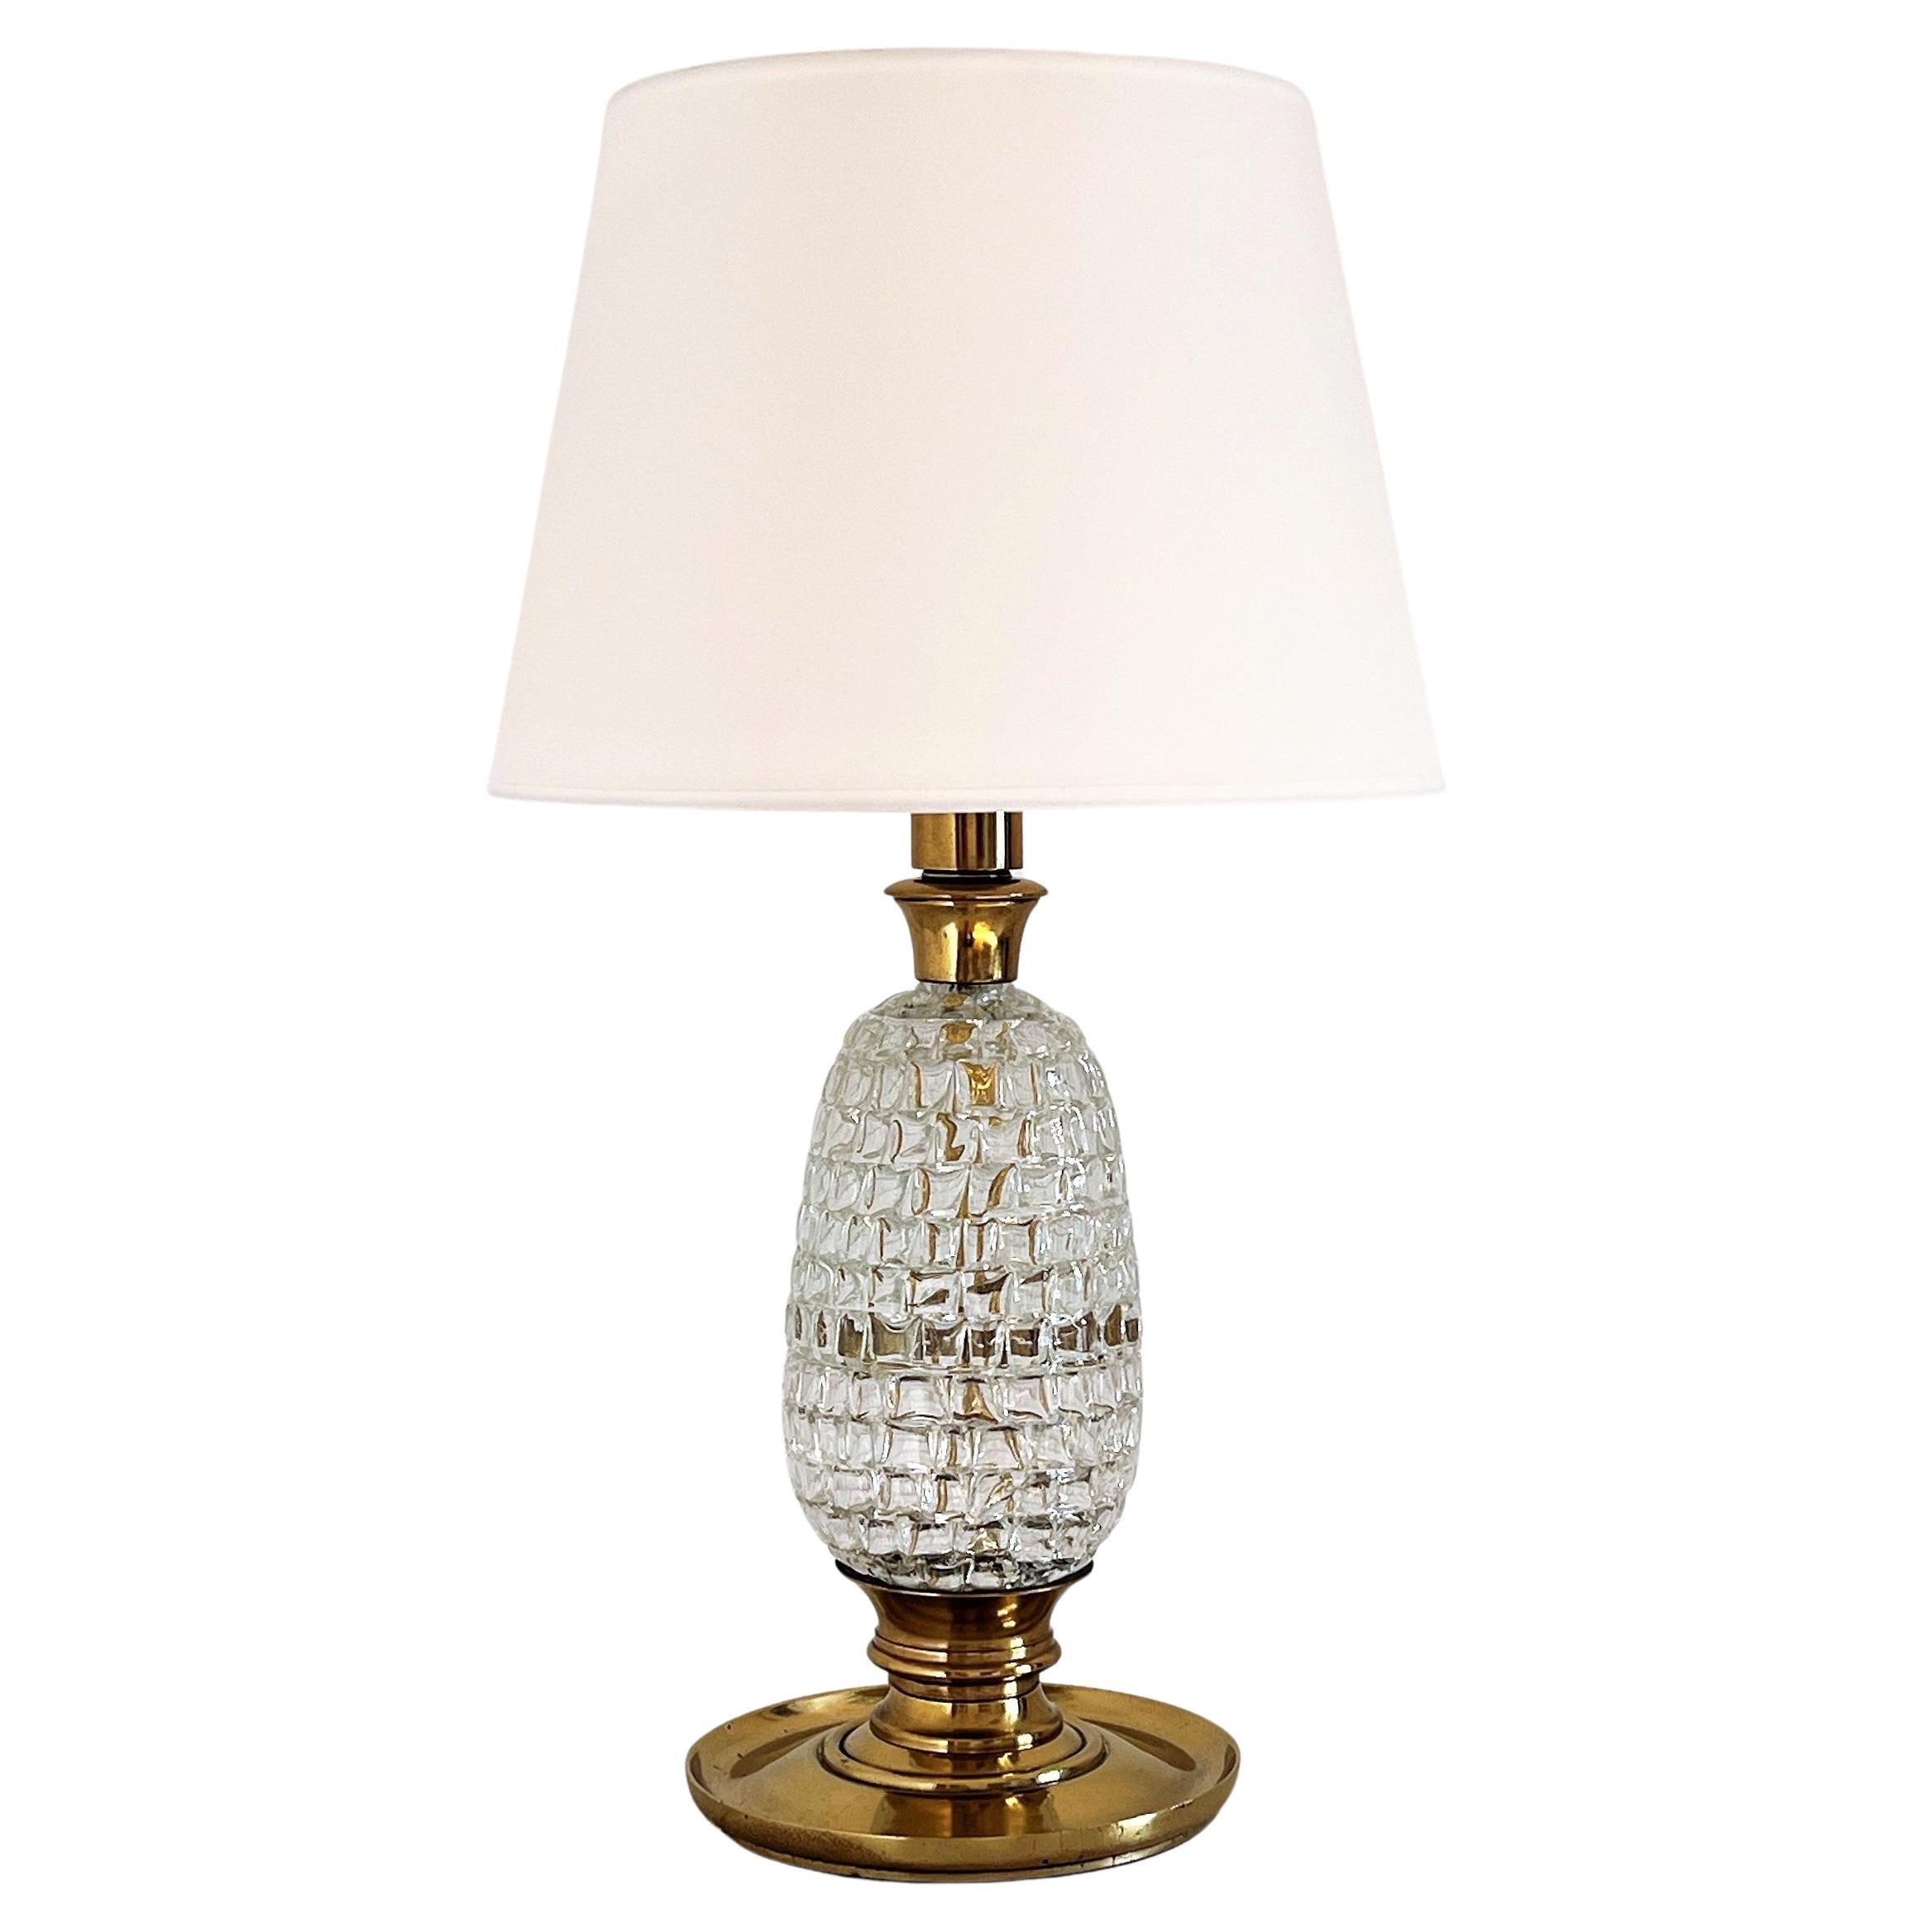 Italian Mid-Century Table Lamp with Brass and Creased Murano Glass Body, 1960s For Sale